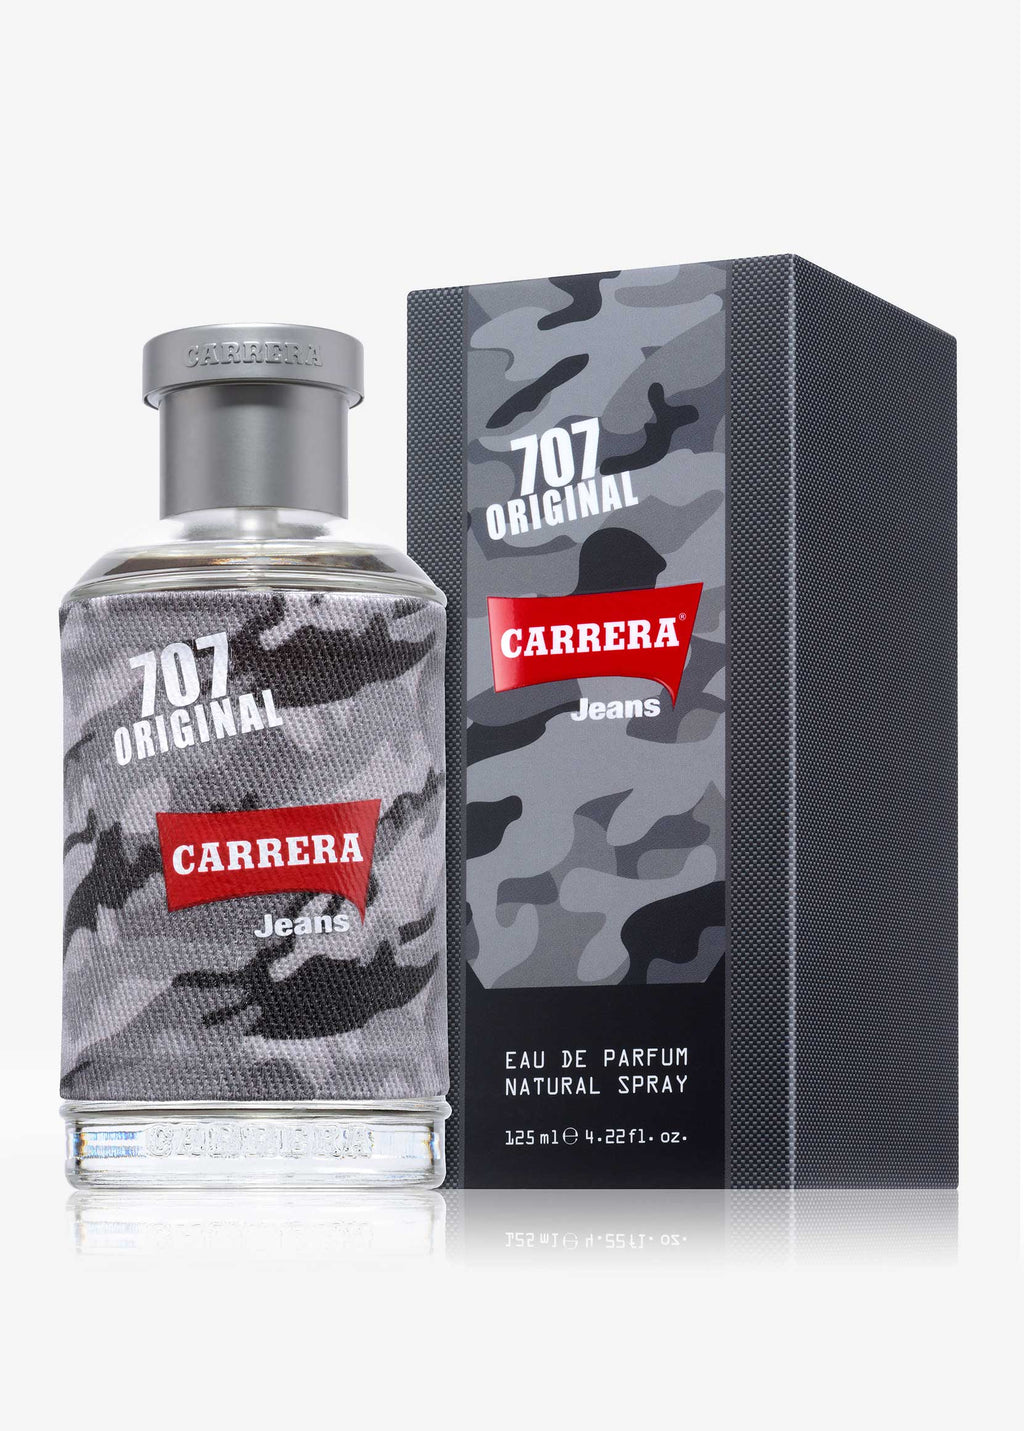 Carrera Jeans Original Fragrance and Body Products OFFICIAL SITE.